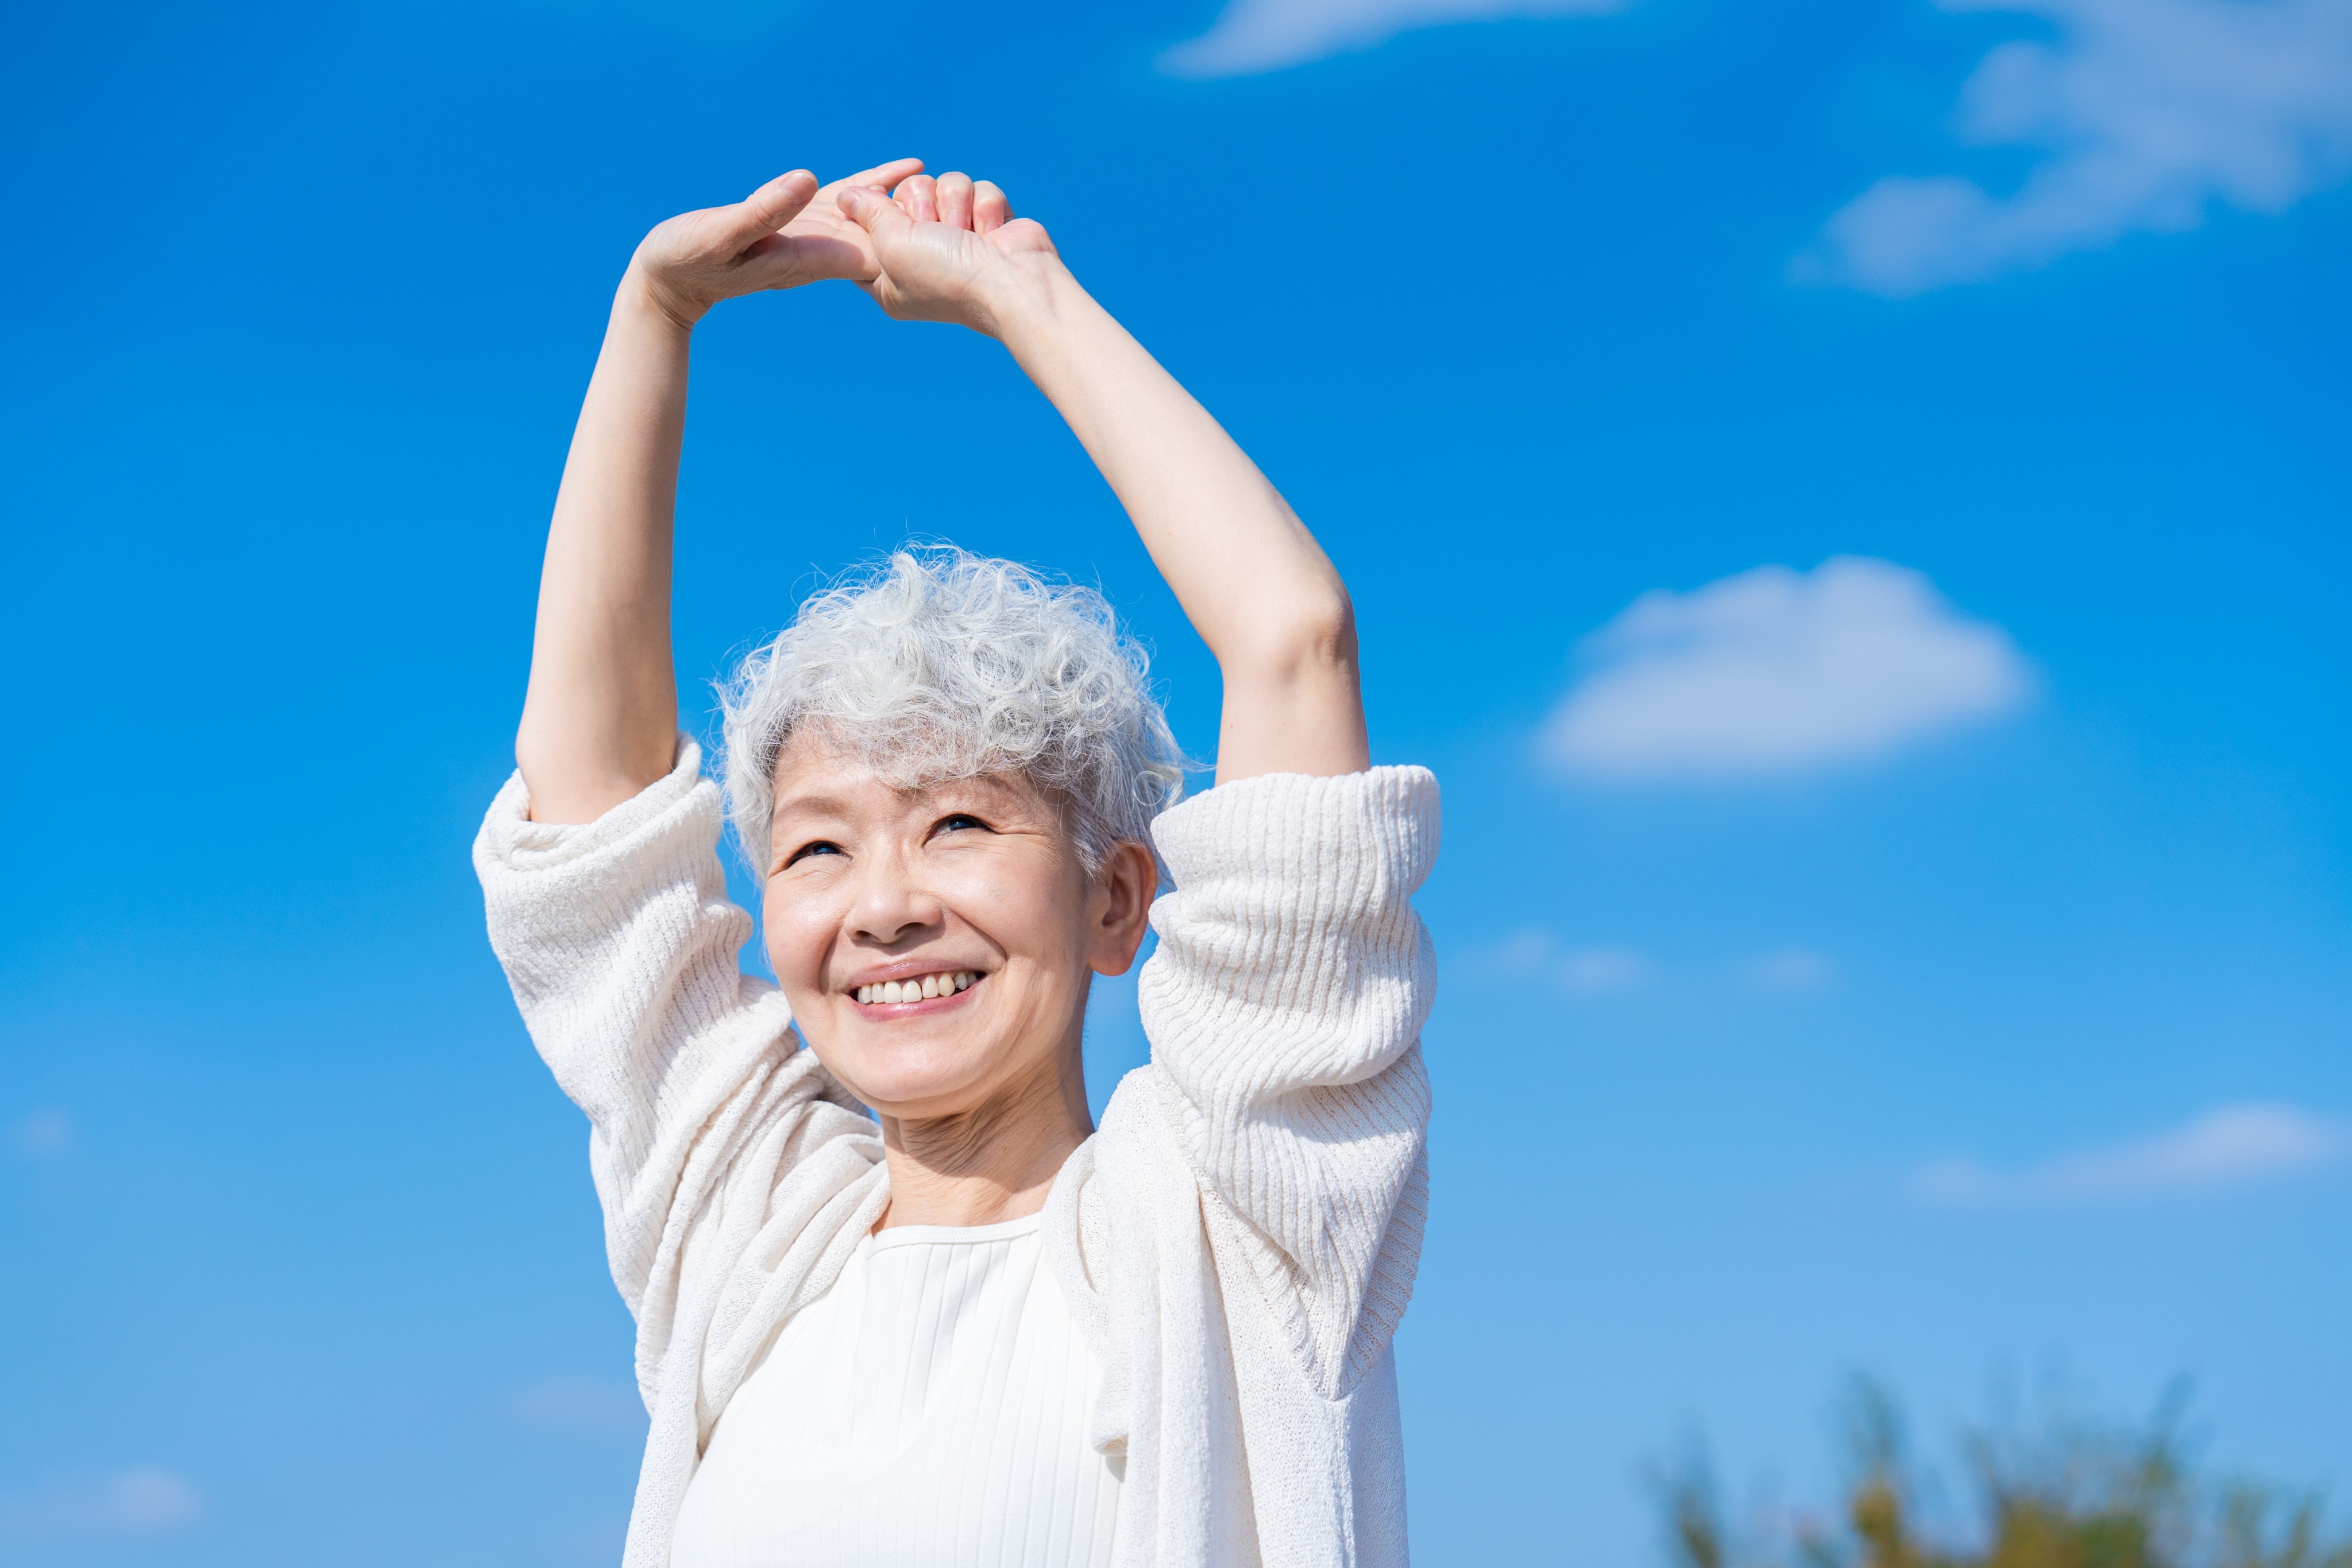 As more of us are becoming invested in our health as we get older, Chi Longevity offers therapies aimed at reversing biological ageing and helping patients stay healthy for longer into their golden years. Photo: Shutterstock